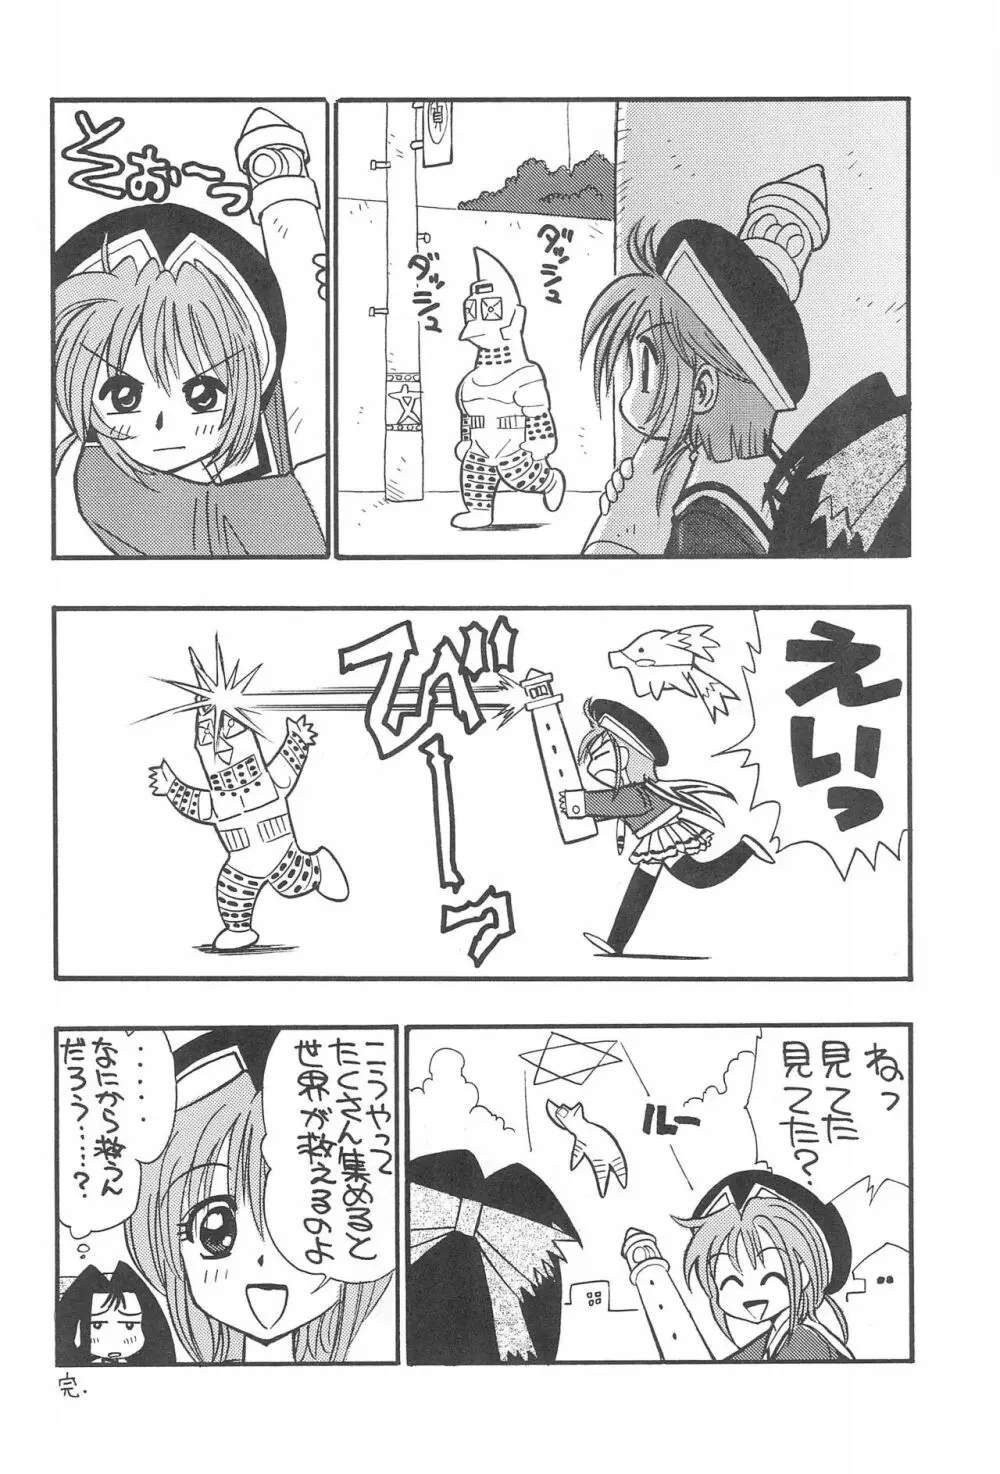 Septem Charm まじかるカナン本 - page6